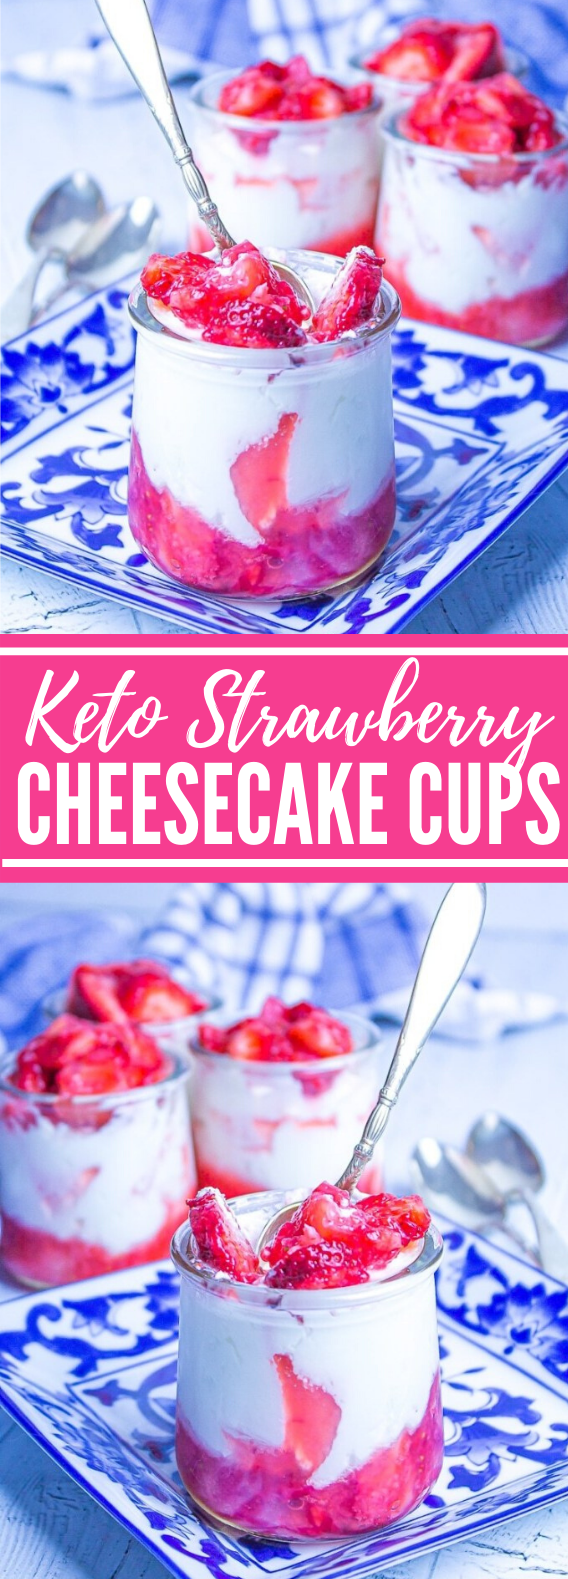 Keto Strawberry Cheesecake Cups #healthy #diet